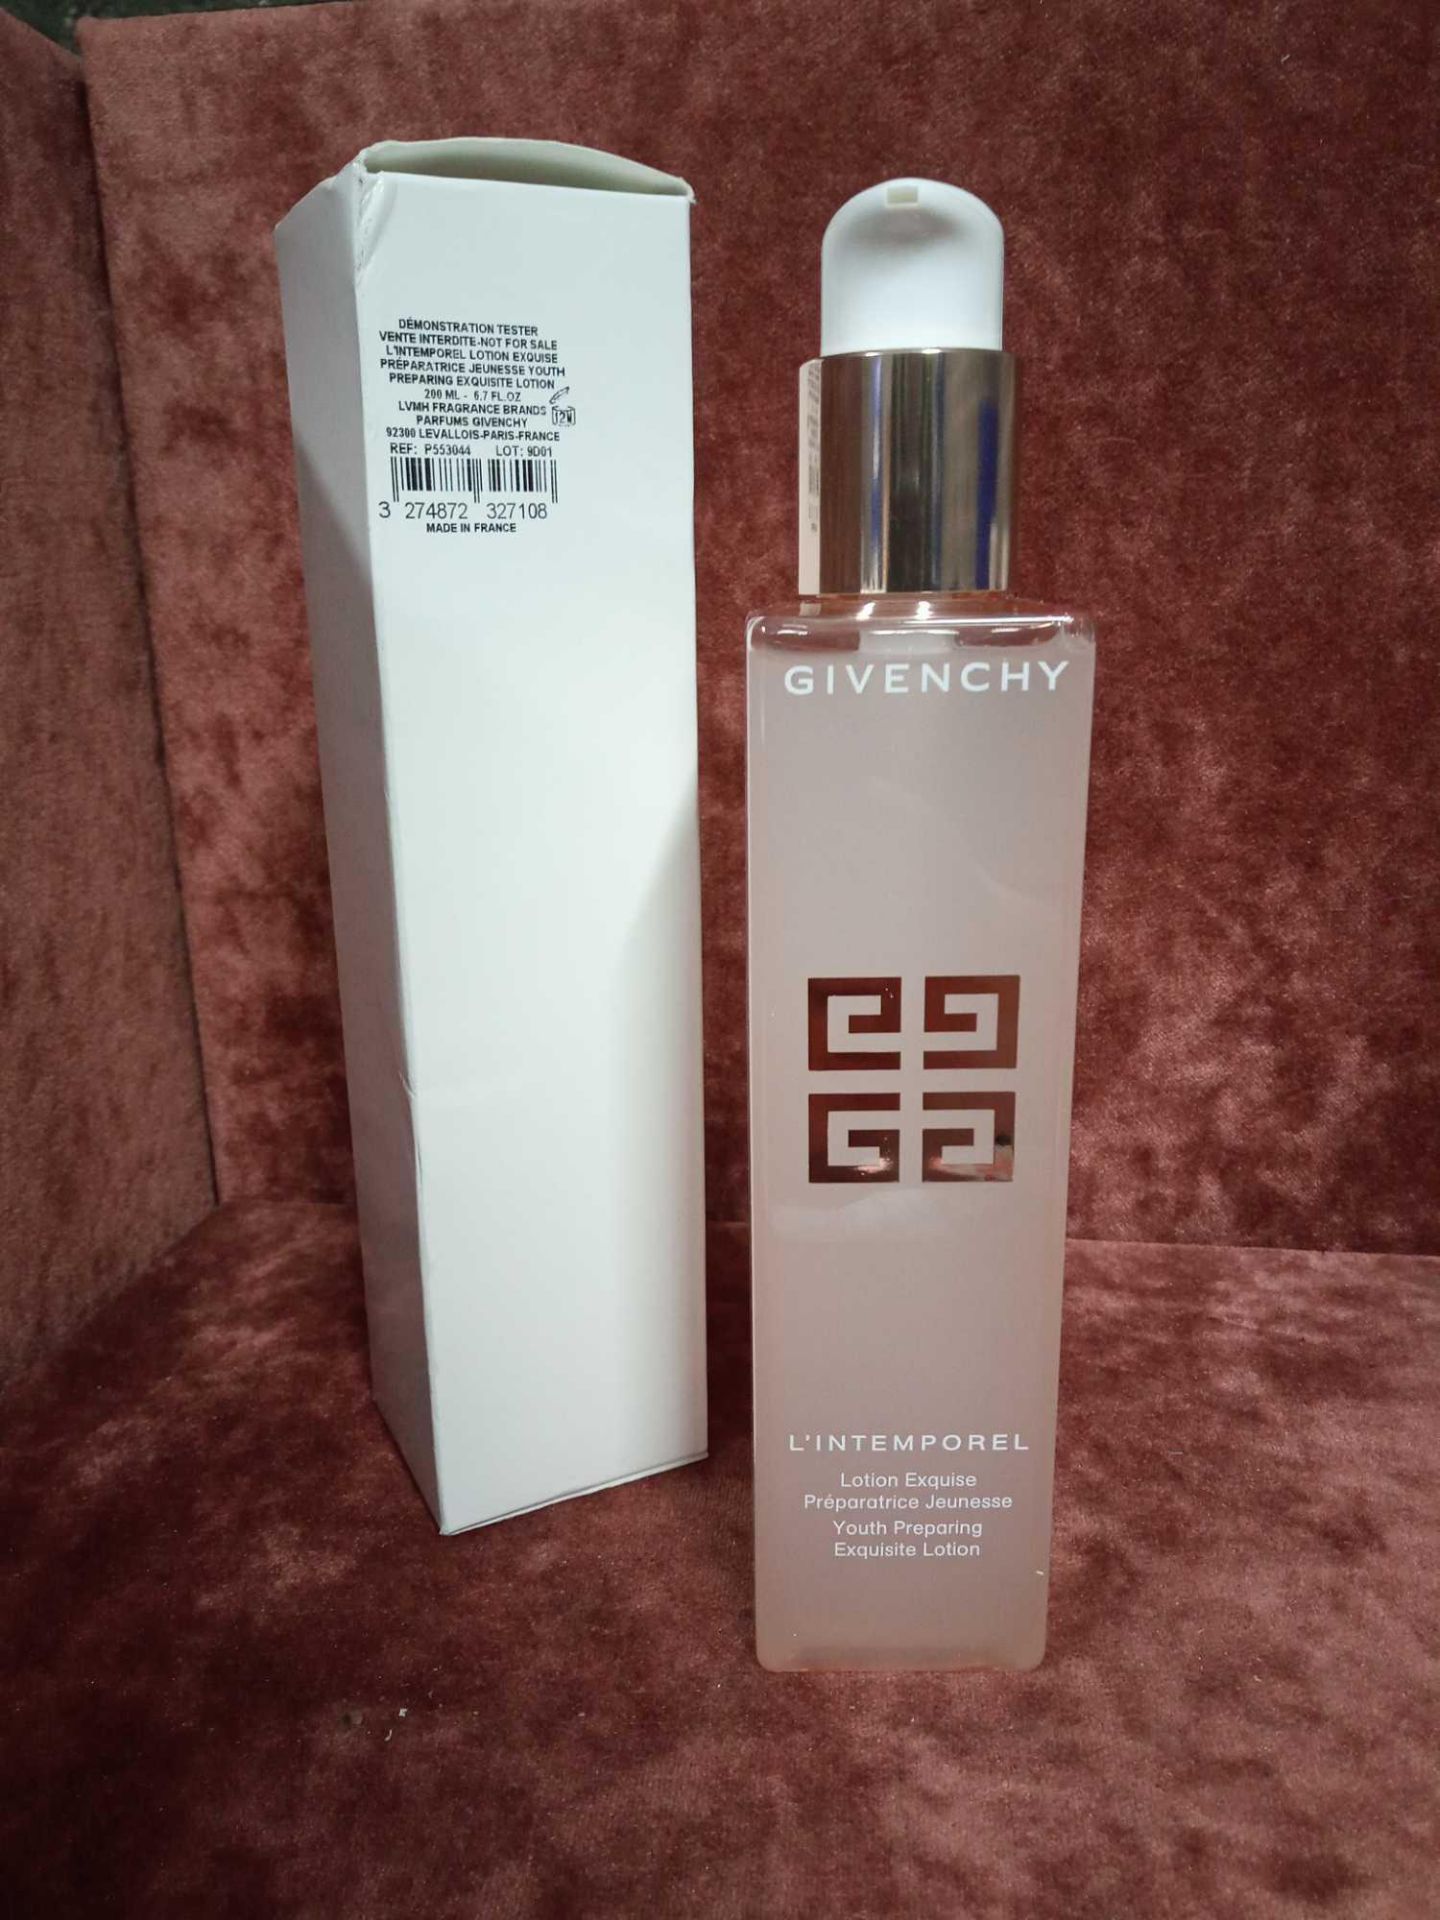 RRP £50 Brand New Boxed Unused Tester Of Givenchy L'Intemporel Youth Preparing Exquisite Lotion 200M